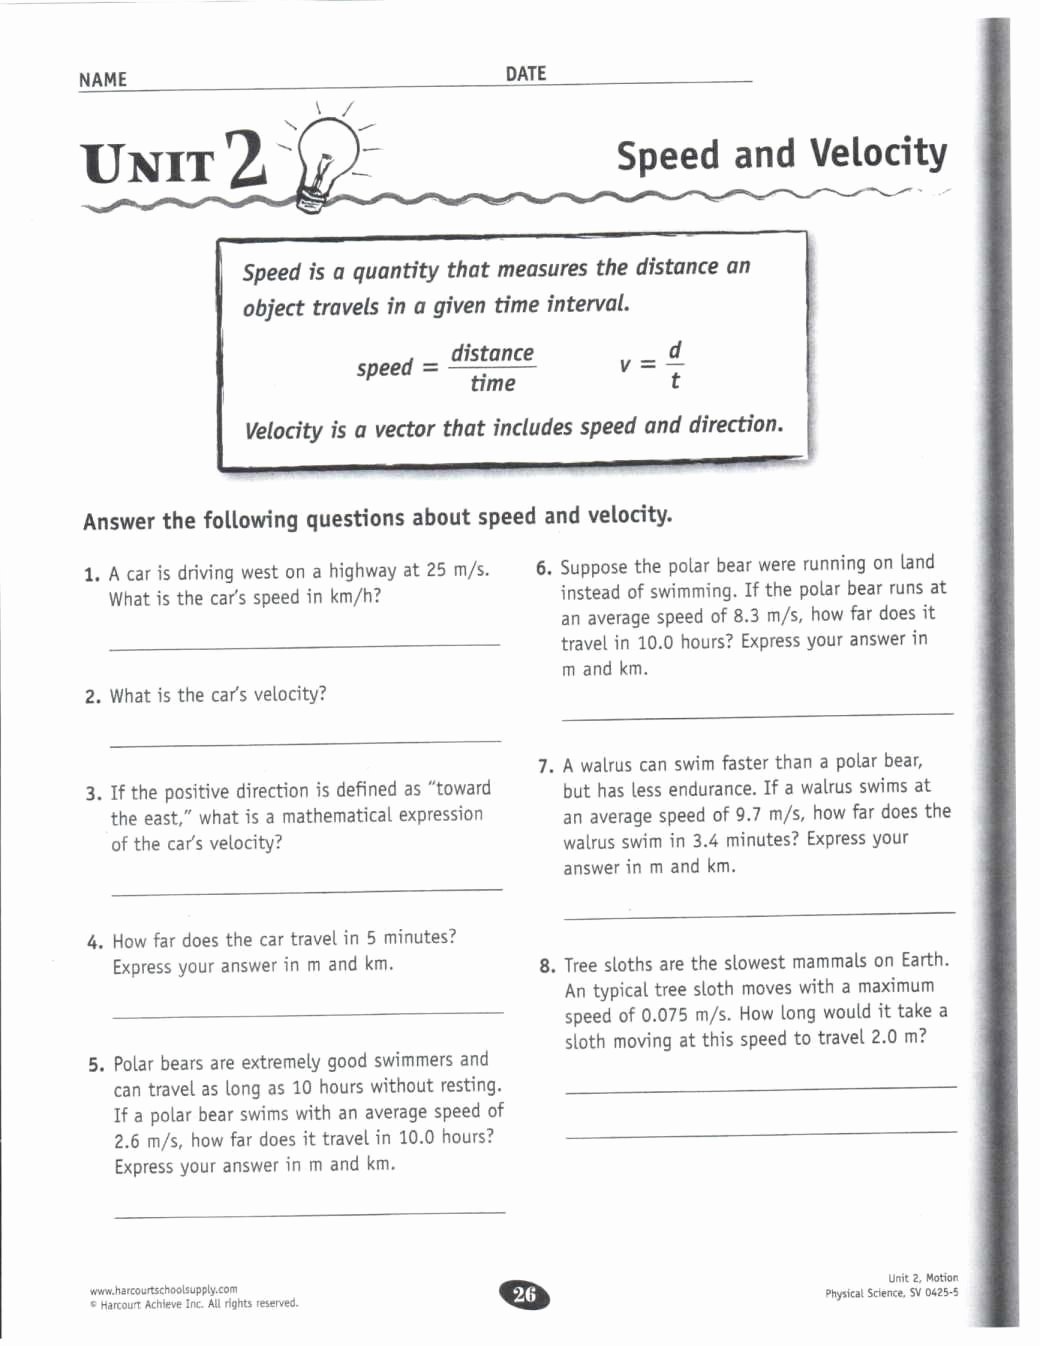 Speed and Velocity Worksheet Answers Inspirational Velocity and Acceleration Calculation Worksheet Answer Key